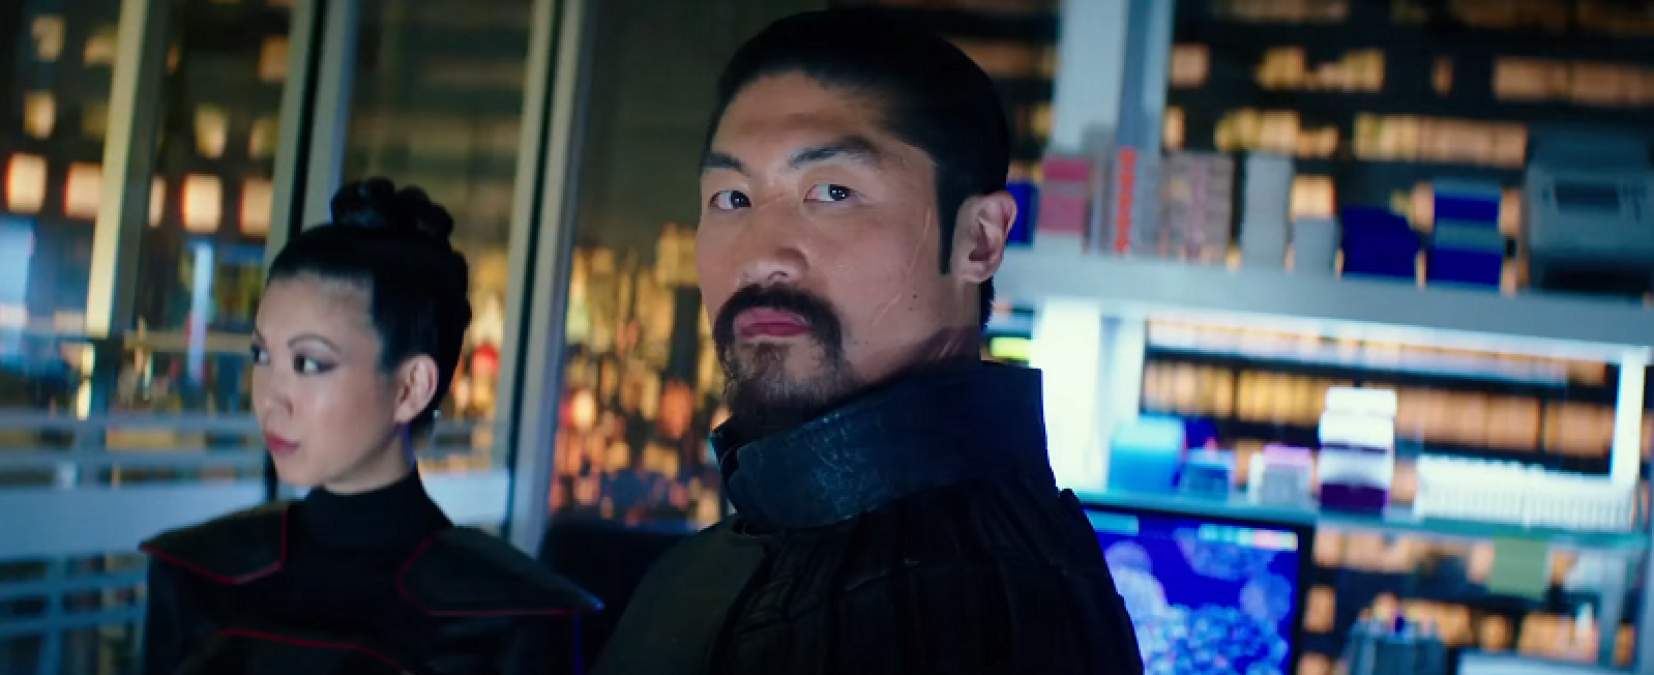 Tmnt2 Star Brian Tee Explains Why He Wants To Play Namor The Sub Mariner For Marvel